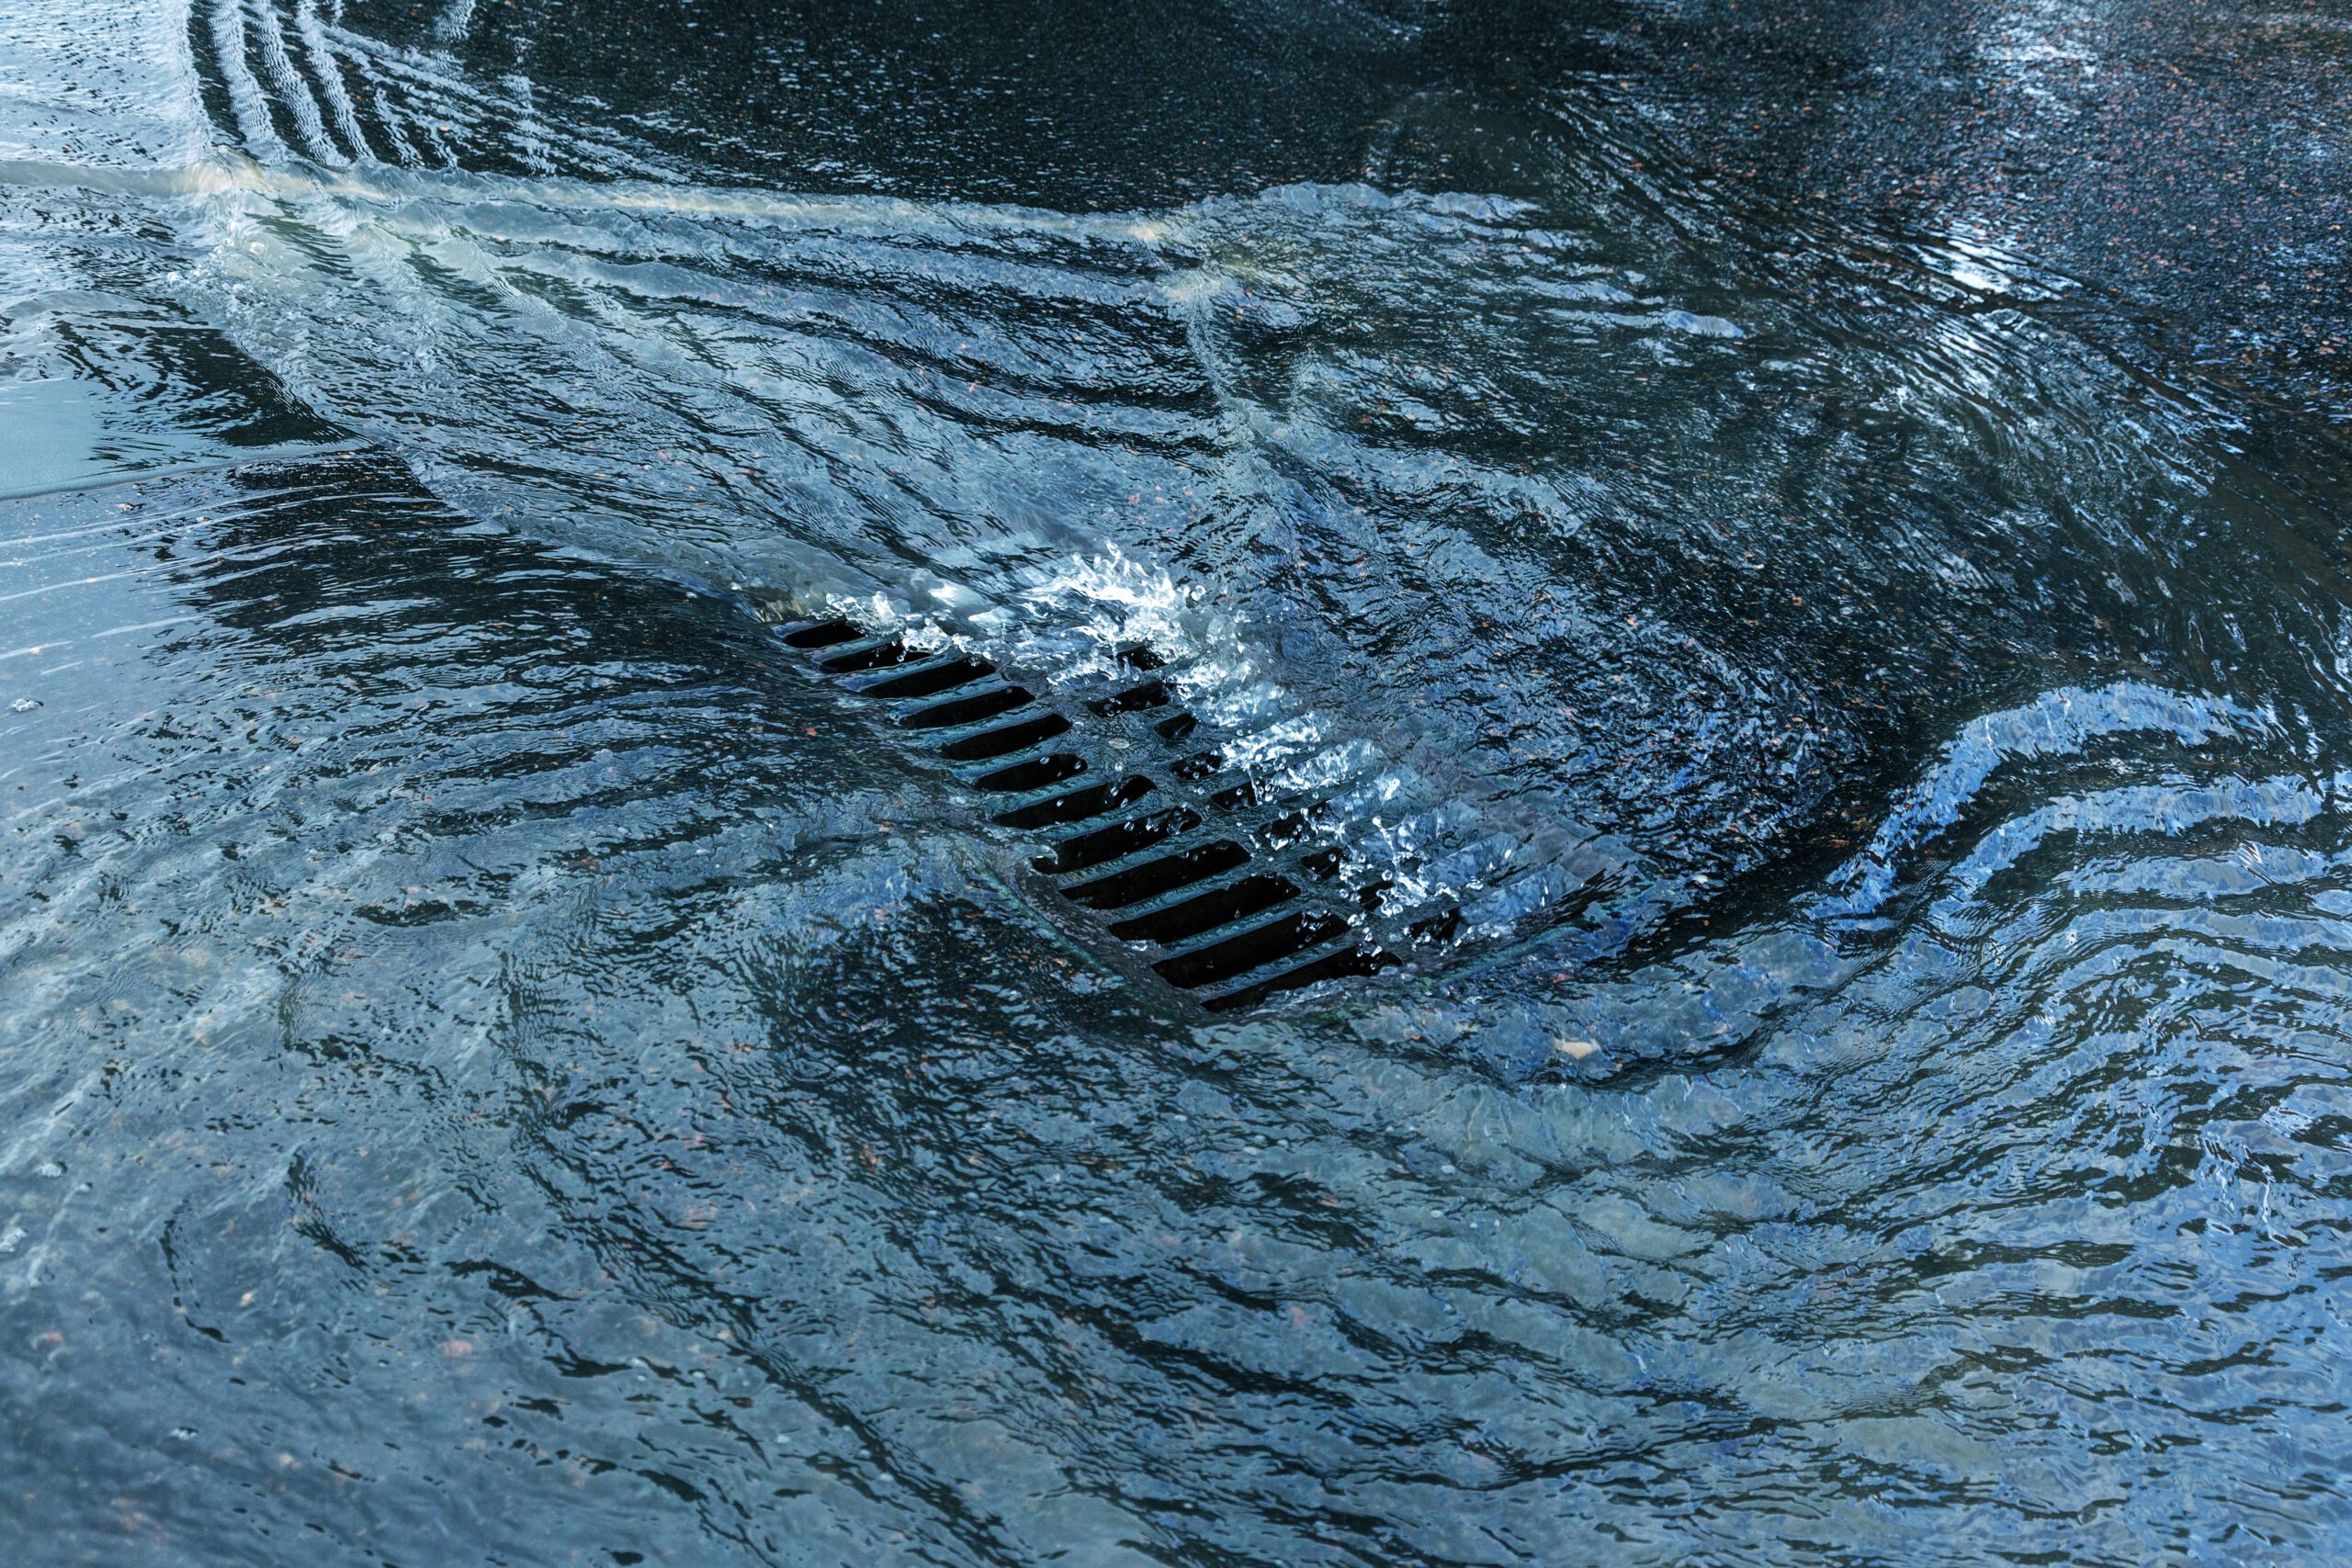 a flooded street with a grate in the water.